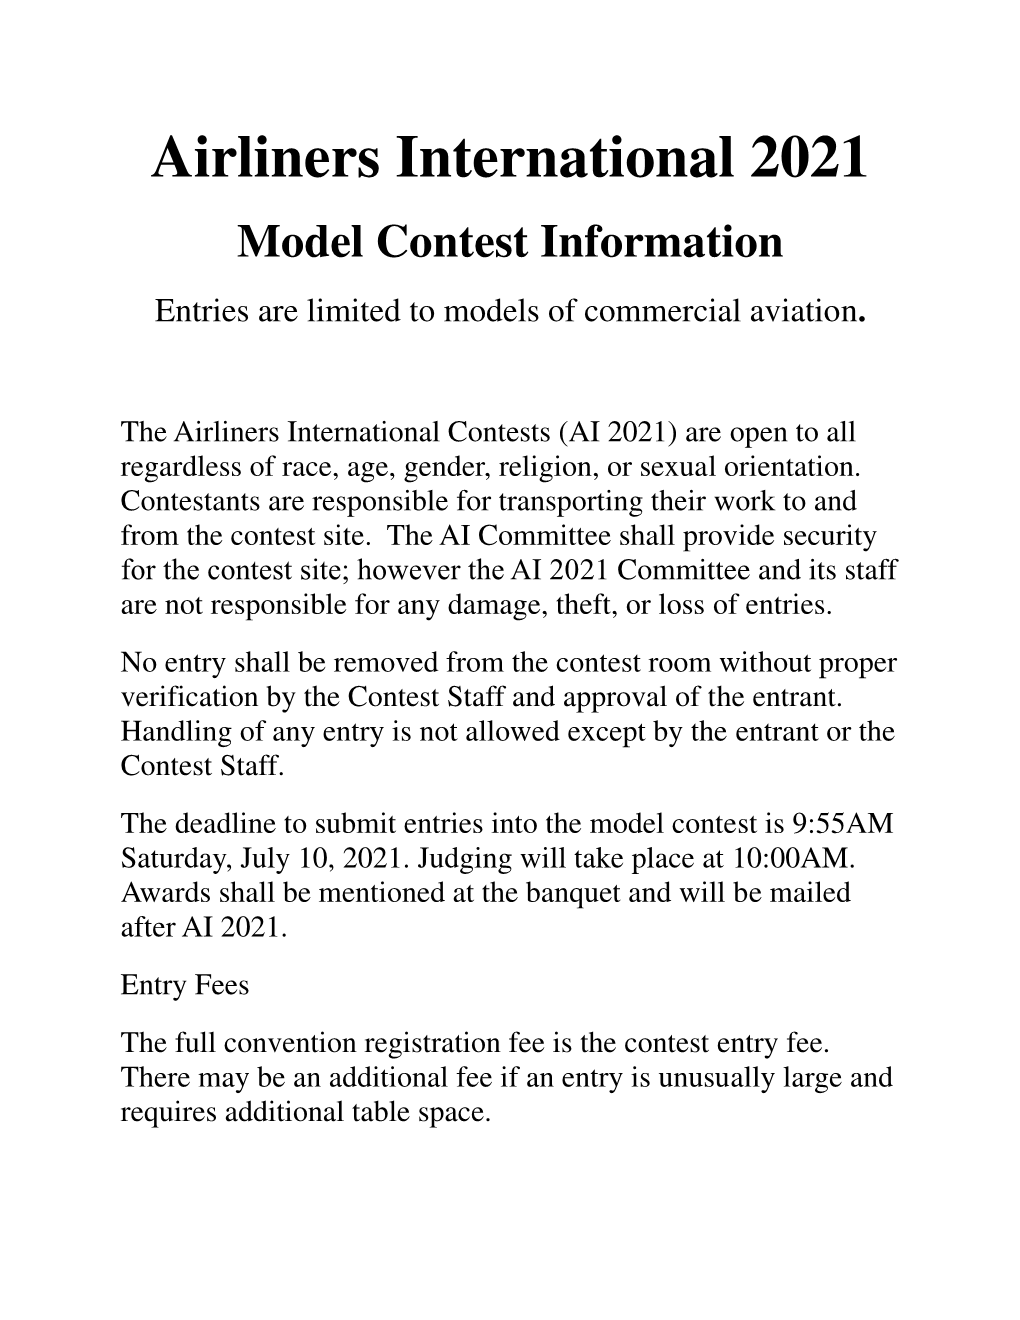 Airliners International 2021 Model Contest Information Entries Are Limited to Models of Commercial Aviation